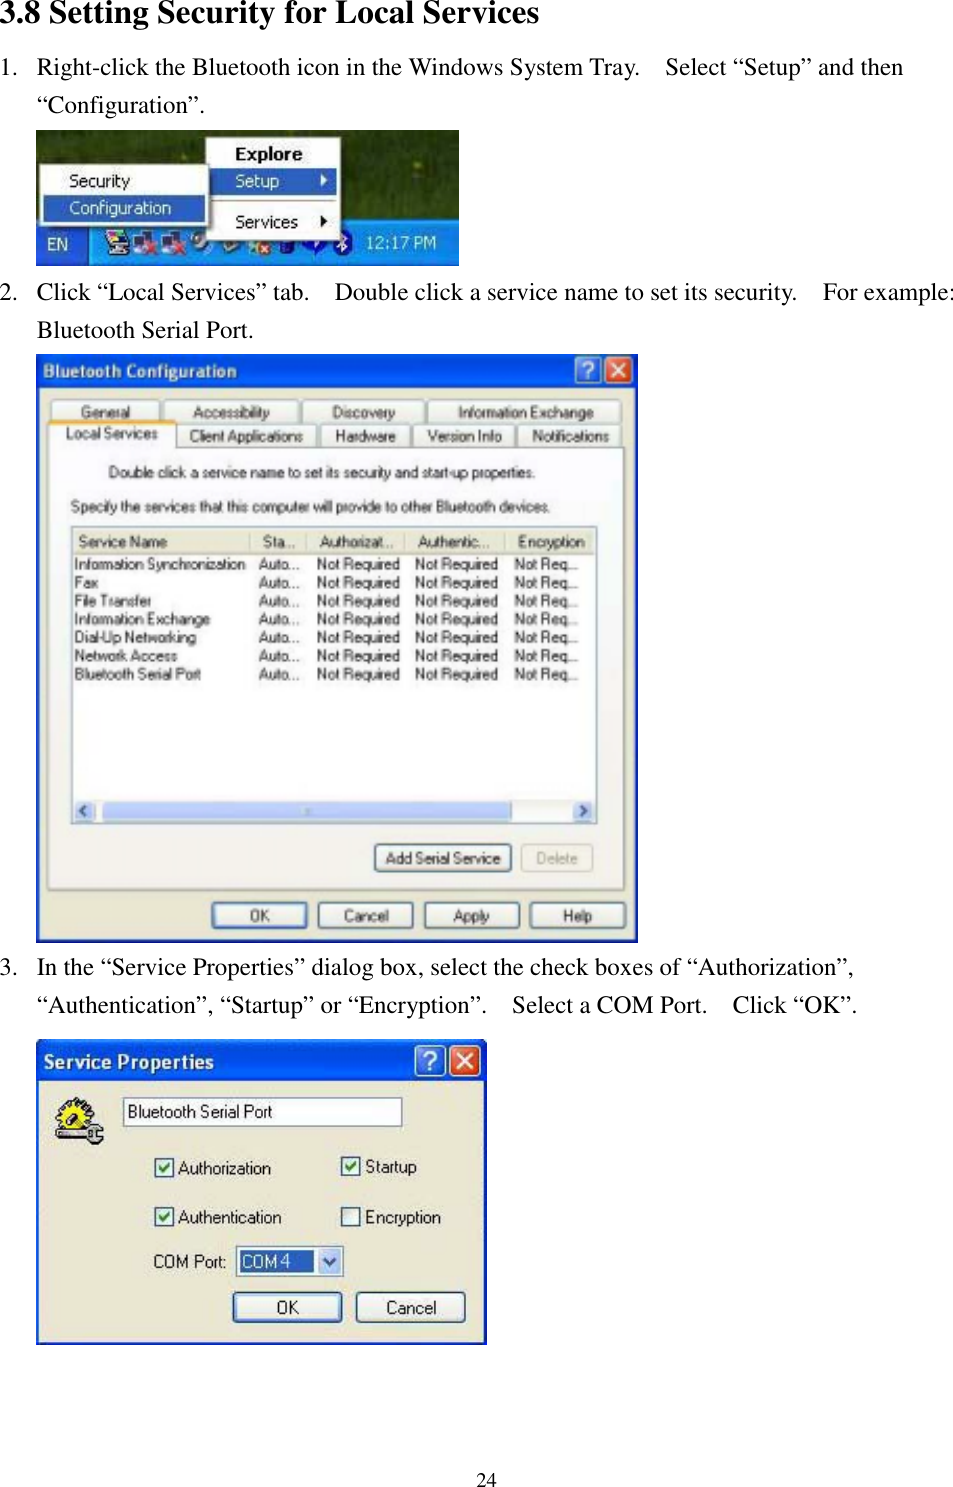 243.8 Setting Security for Local Services1. Right-click the Bluetooth icon in the Windows System Tray.    Select “Setup” and then“Configuration”.2. Click “Local Services” tab.    Double click a service name to set its security.    For example:Bluetooth Serial Port.3. In the “Service Properties” dialog box, select the check boxes of “Authorization”,“Authentication”, “Startup” or “Encryption”.    Select a COM Port.    Click “OK”.